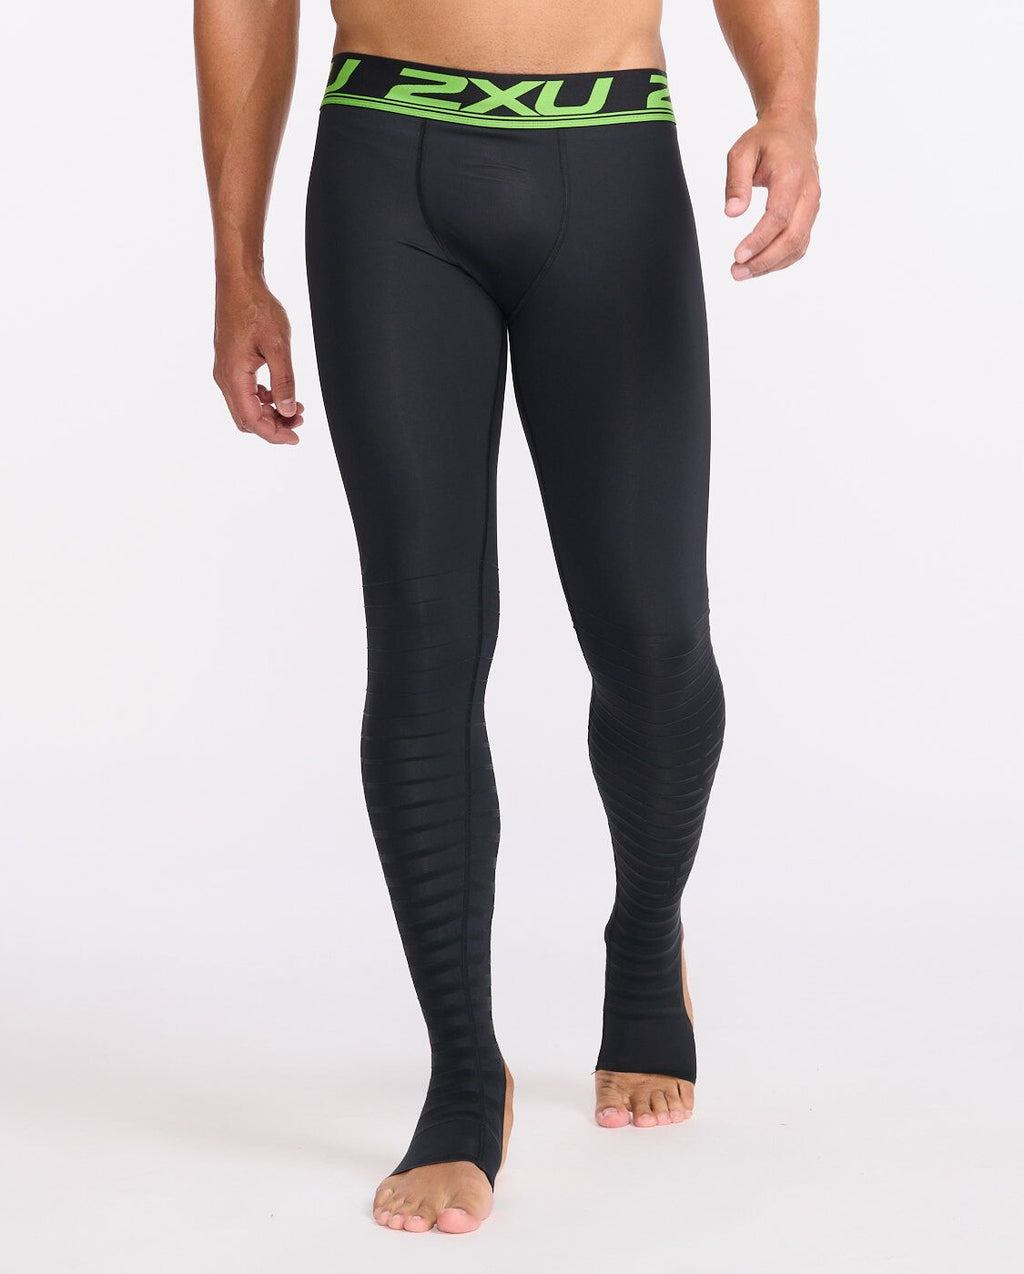 Recovery Compression Herre – 2XU